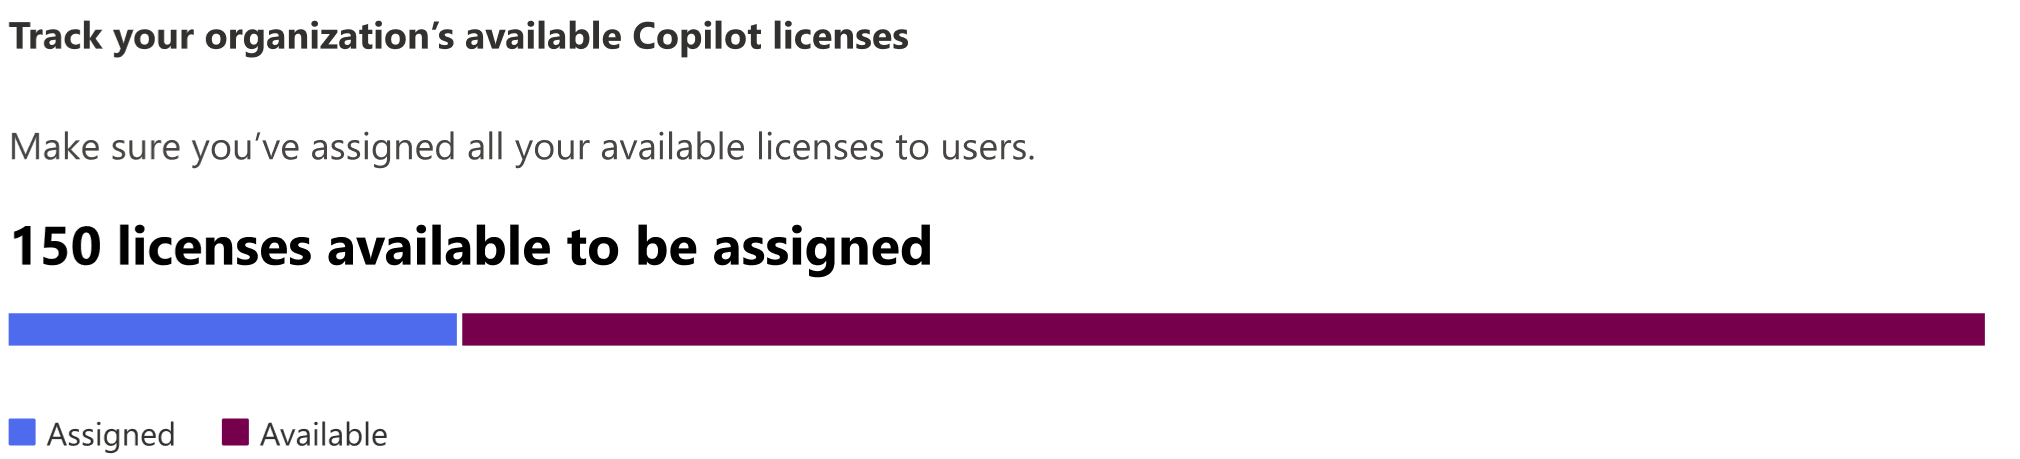 Screenshot showing an organization's number of available licenses to assign.